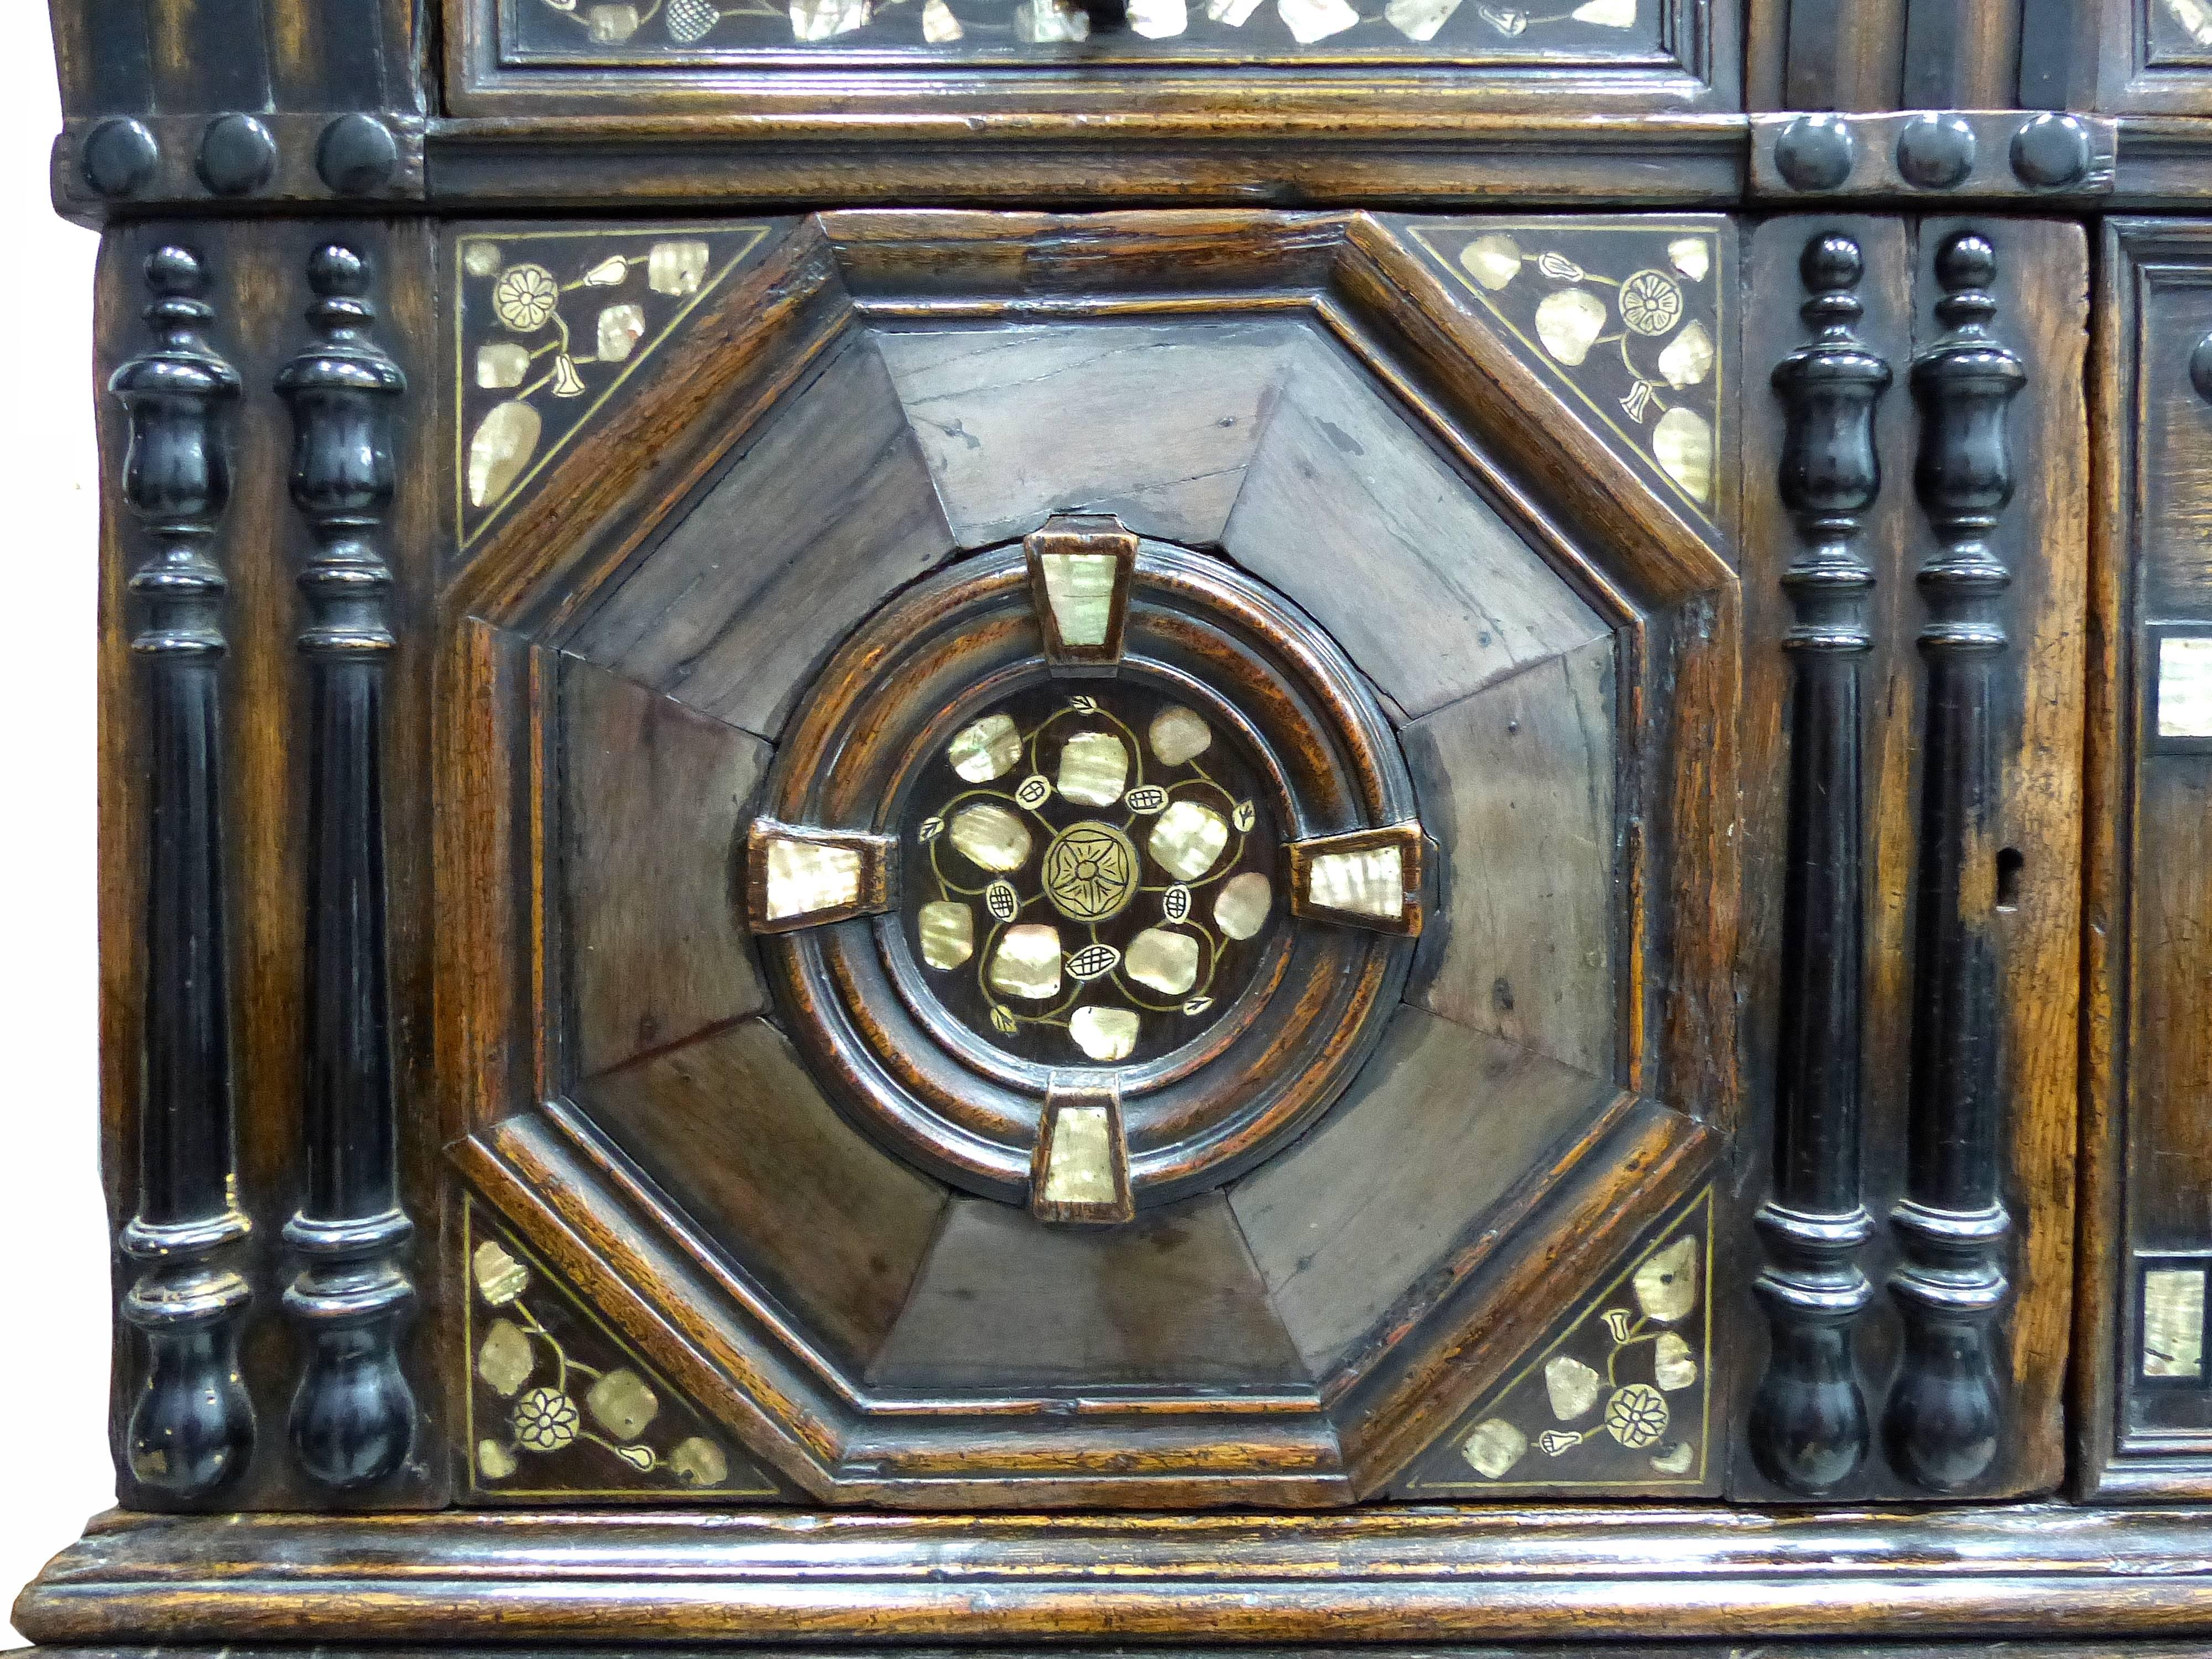 Restoration Charles II English Cabinet circa 1660-1685, Mother-of-Pearl Inlays

This is a Charles II oak chest on chest press with an overhanging cornice and a frieze drawer. Below are two octagon paneled cupboard doors flanking an arcaded central